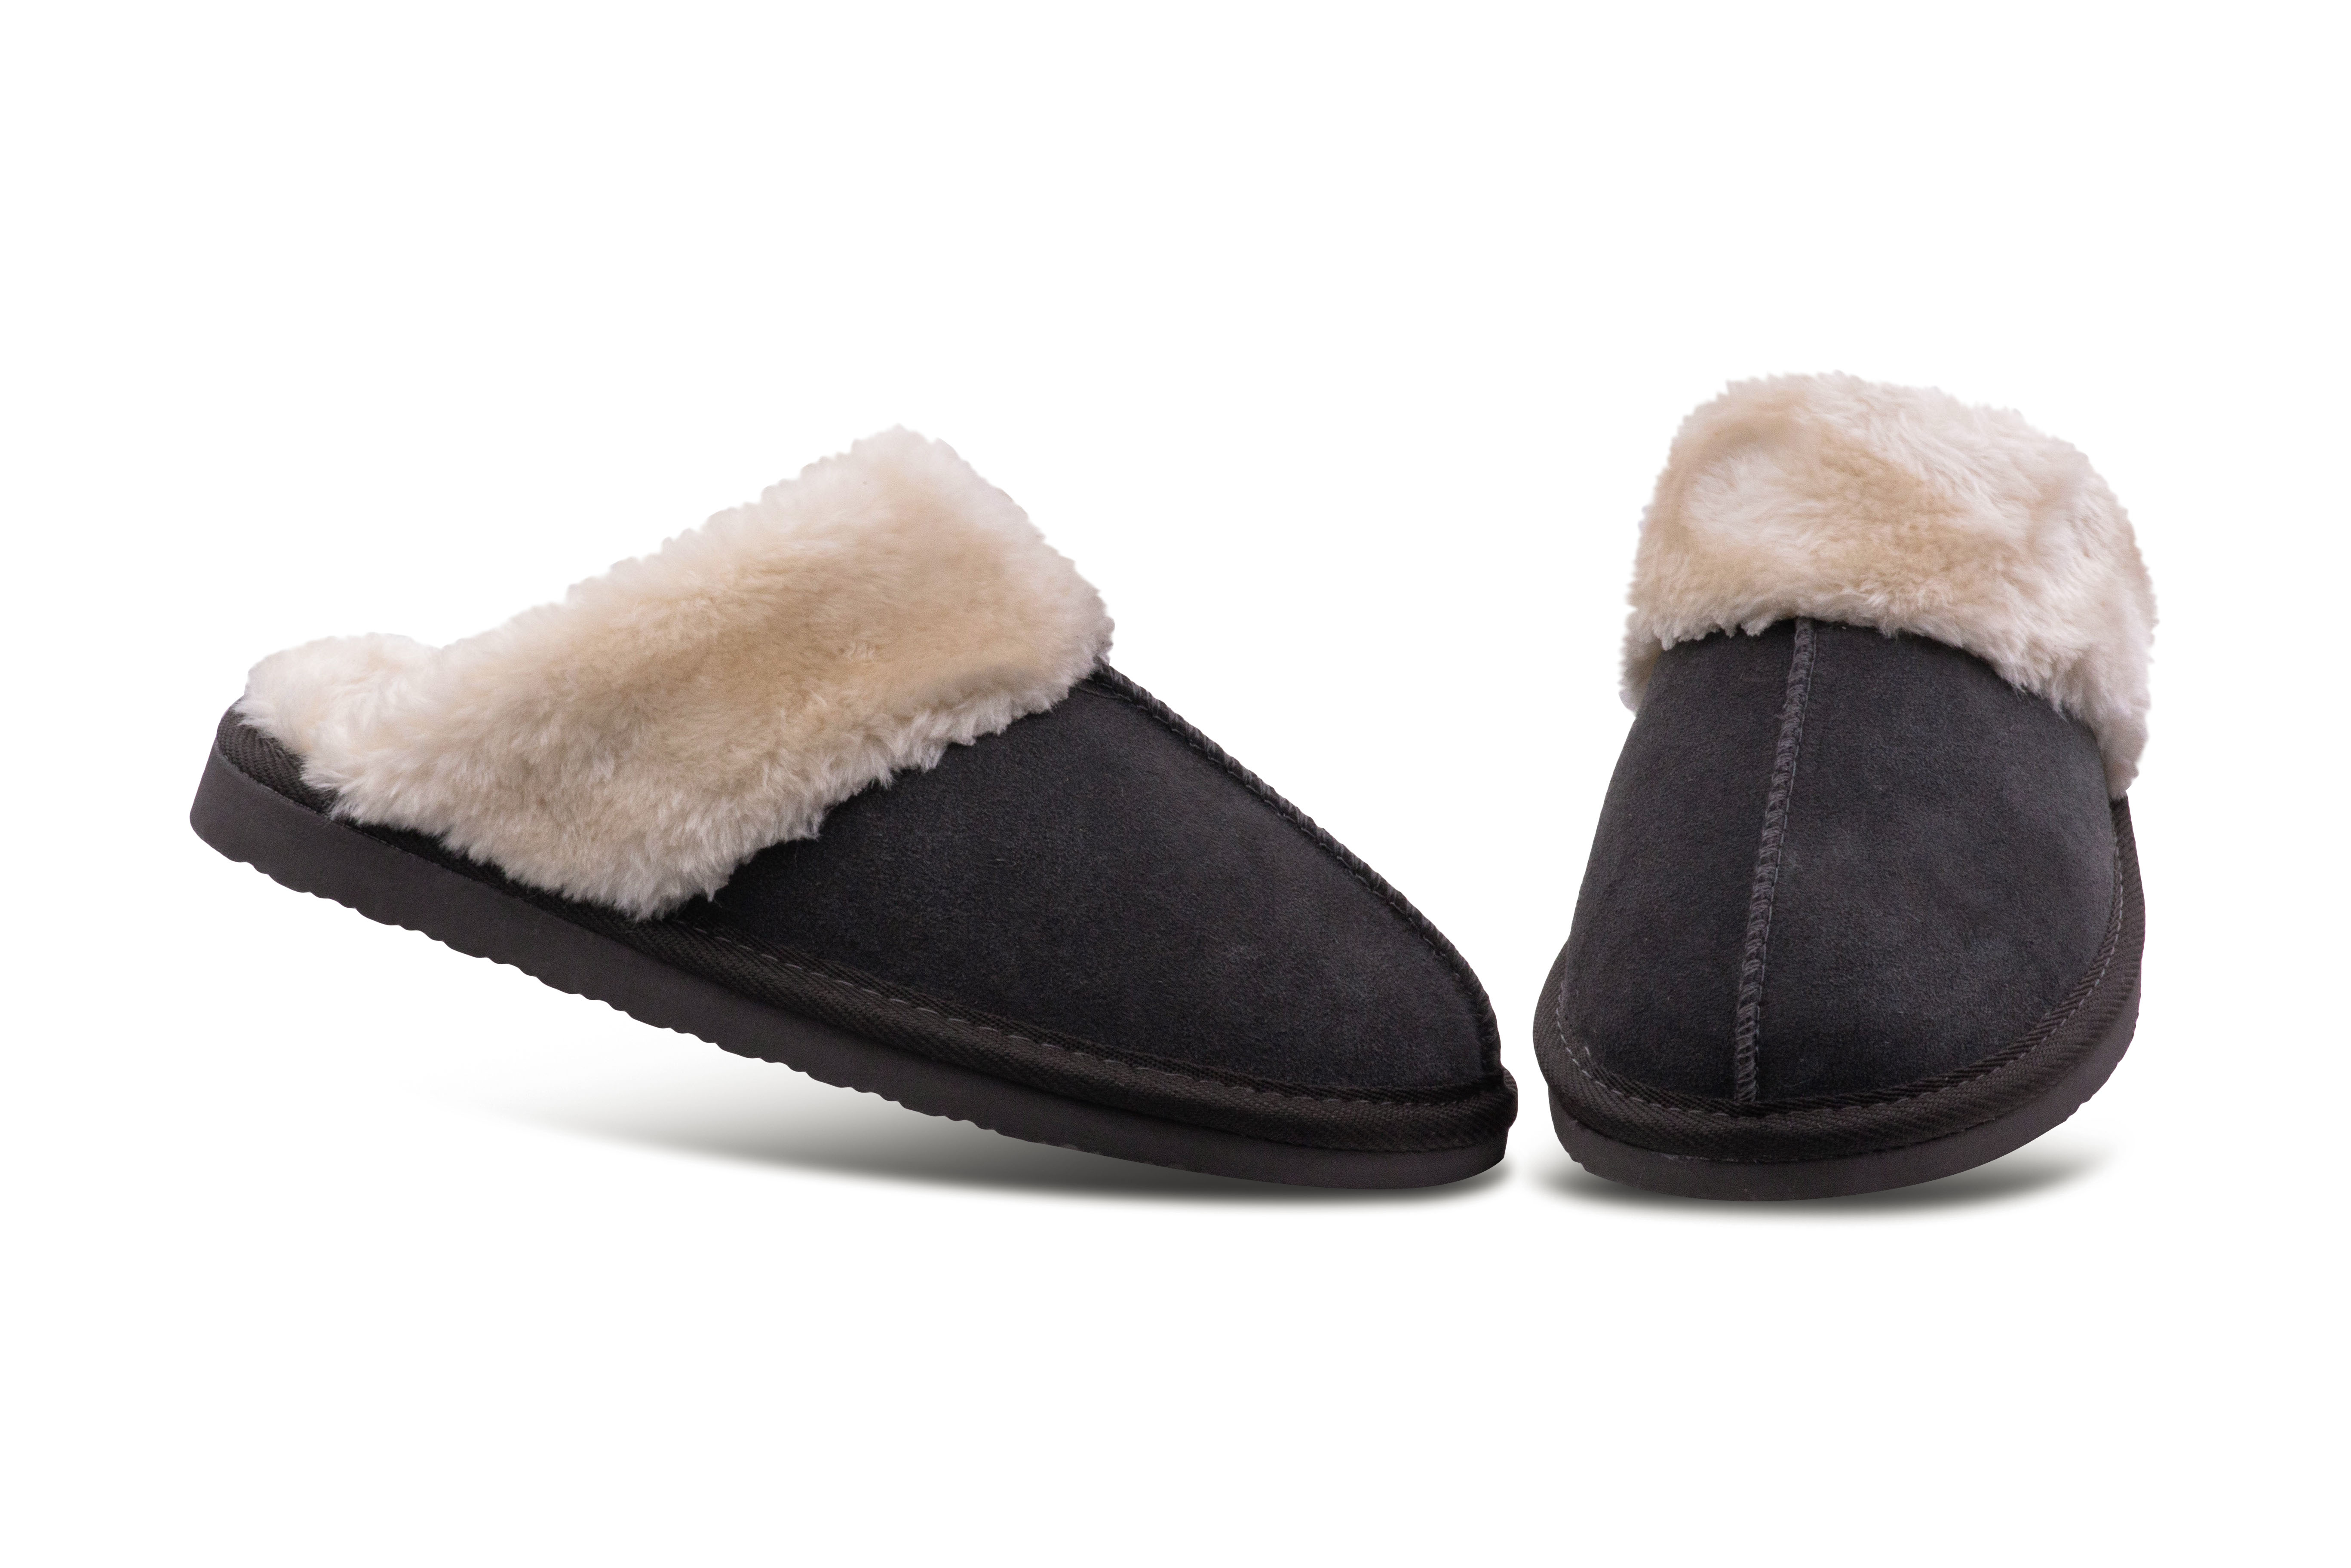 Minnetonka Womens Chesney Fur Lined Slippers - Charcoal - Size 8